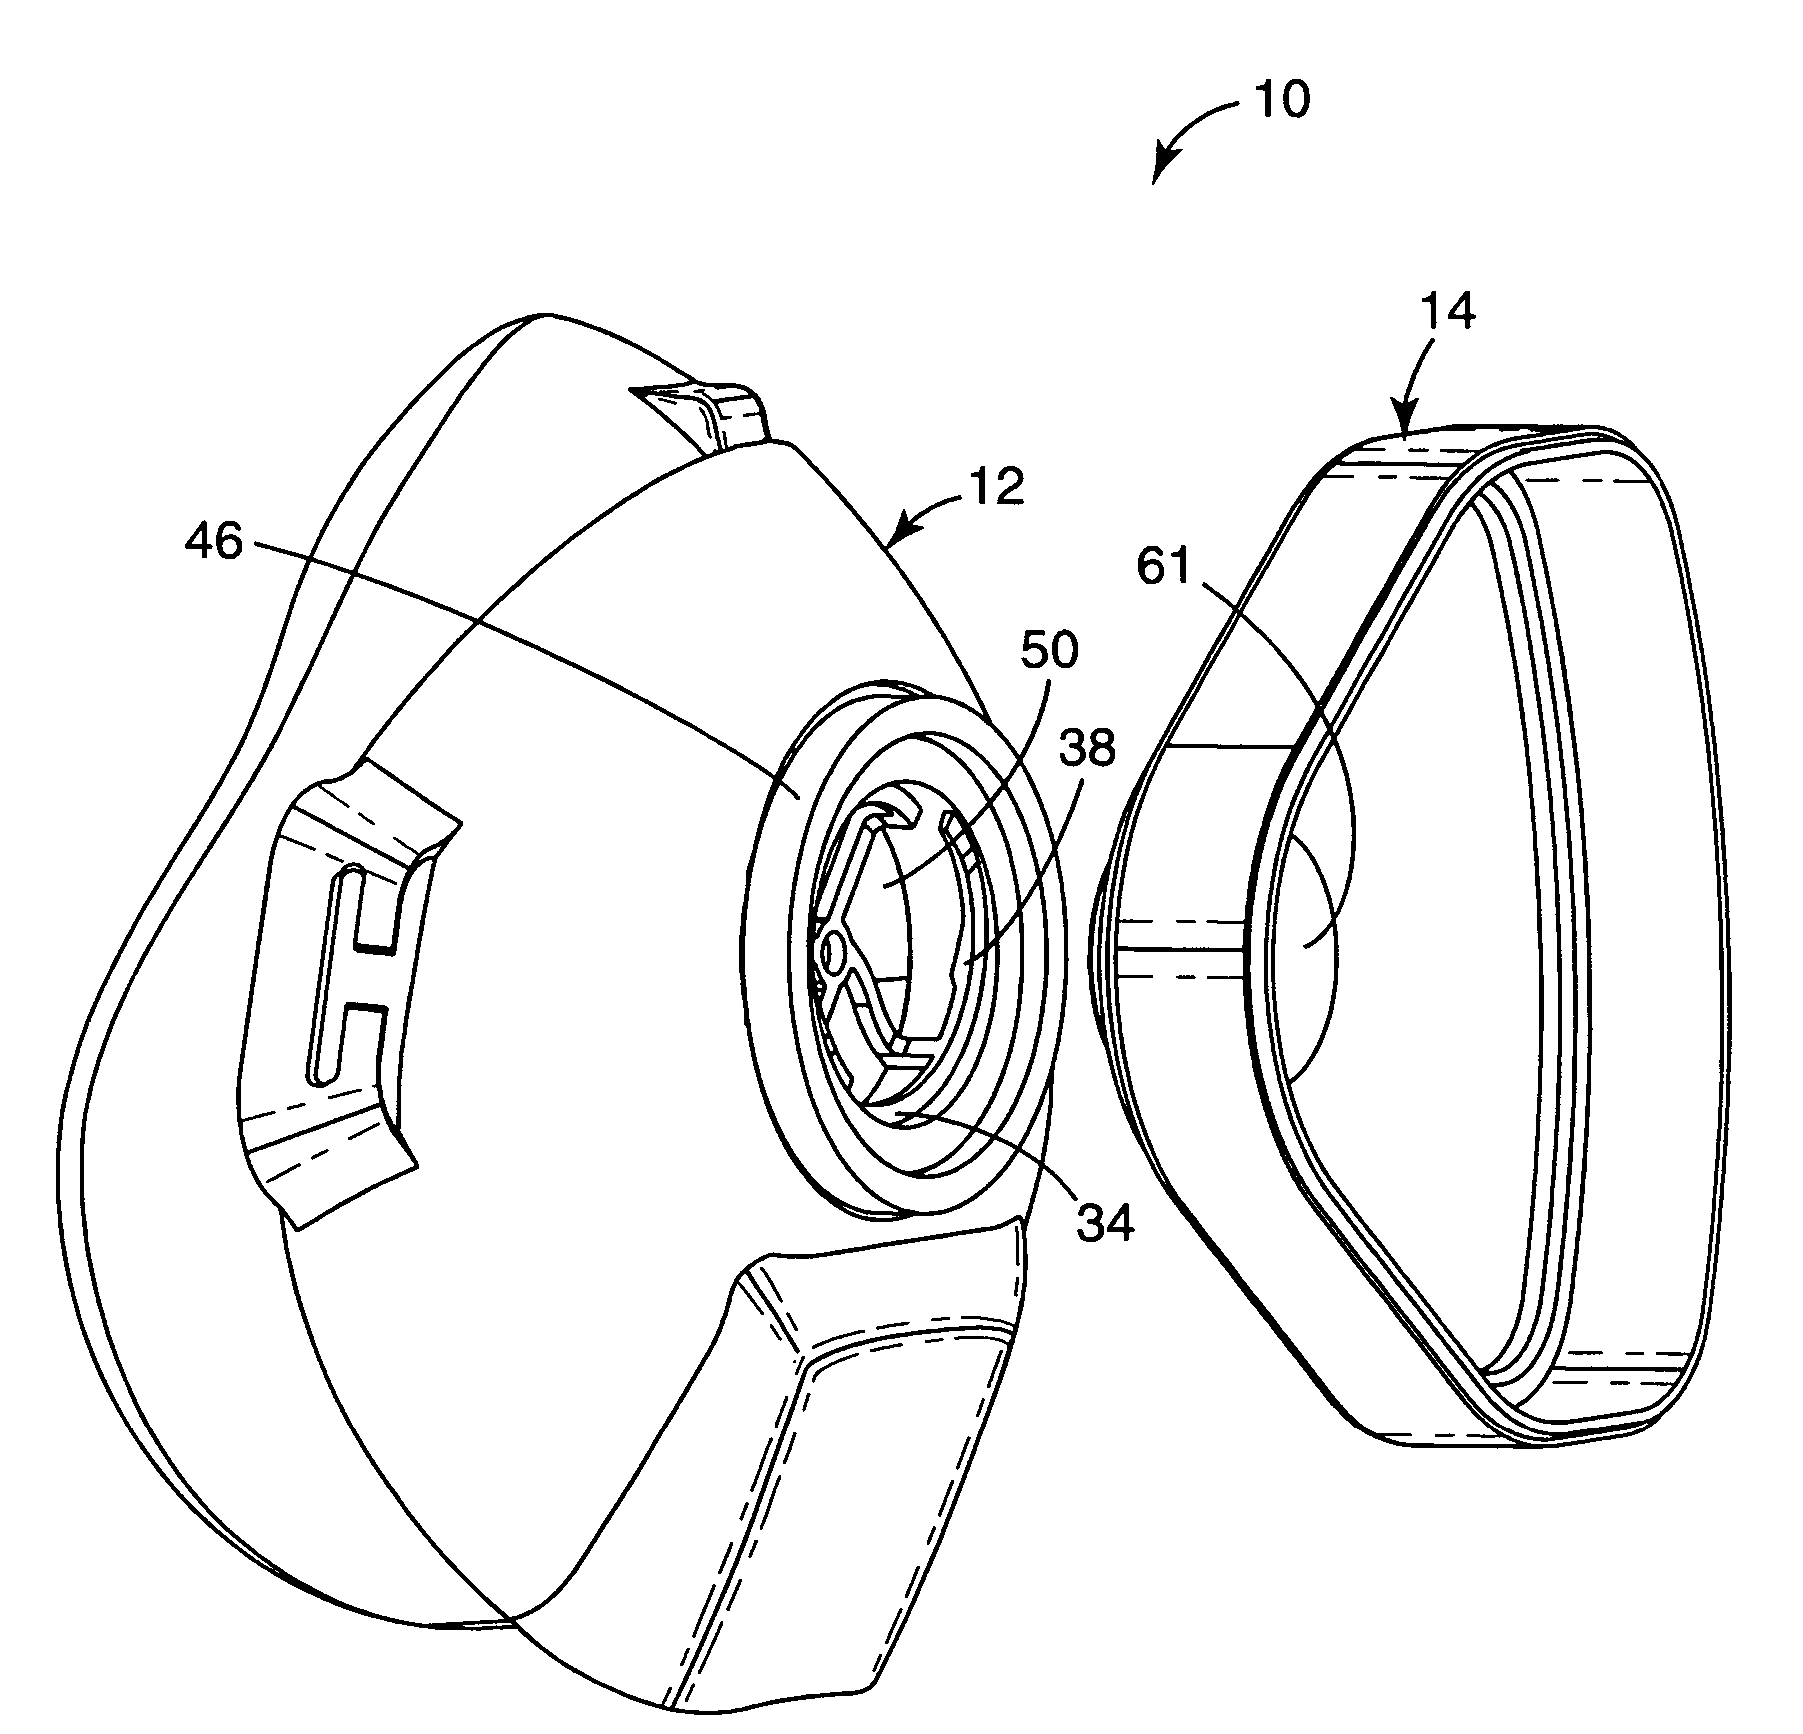 Respiratory protection device that has rapid threaded clean air source attachment